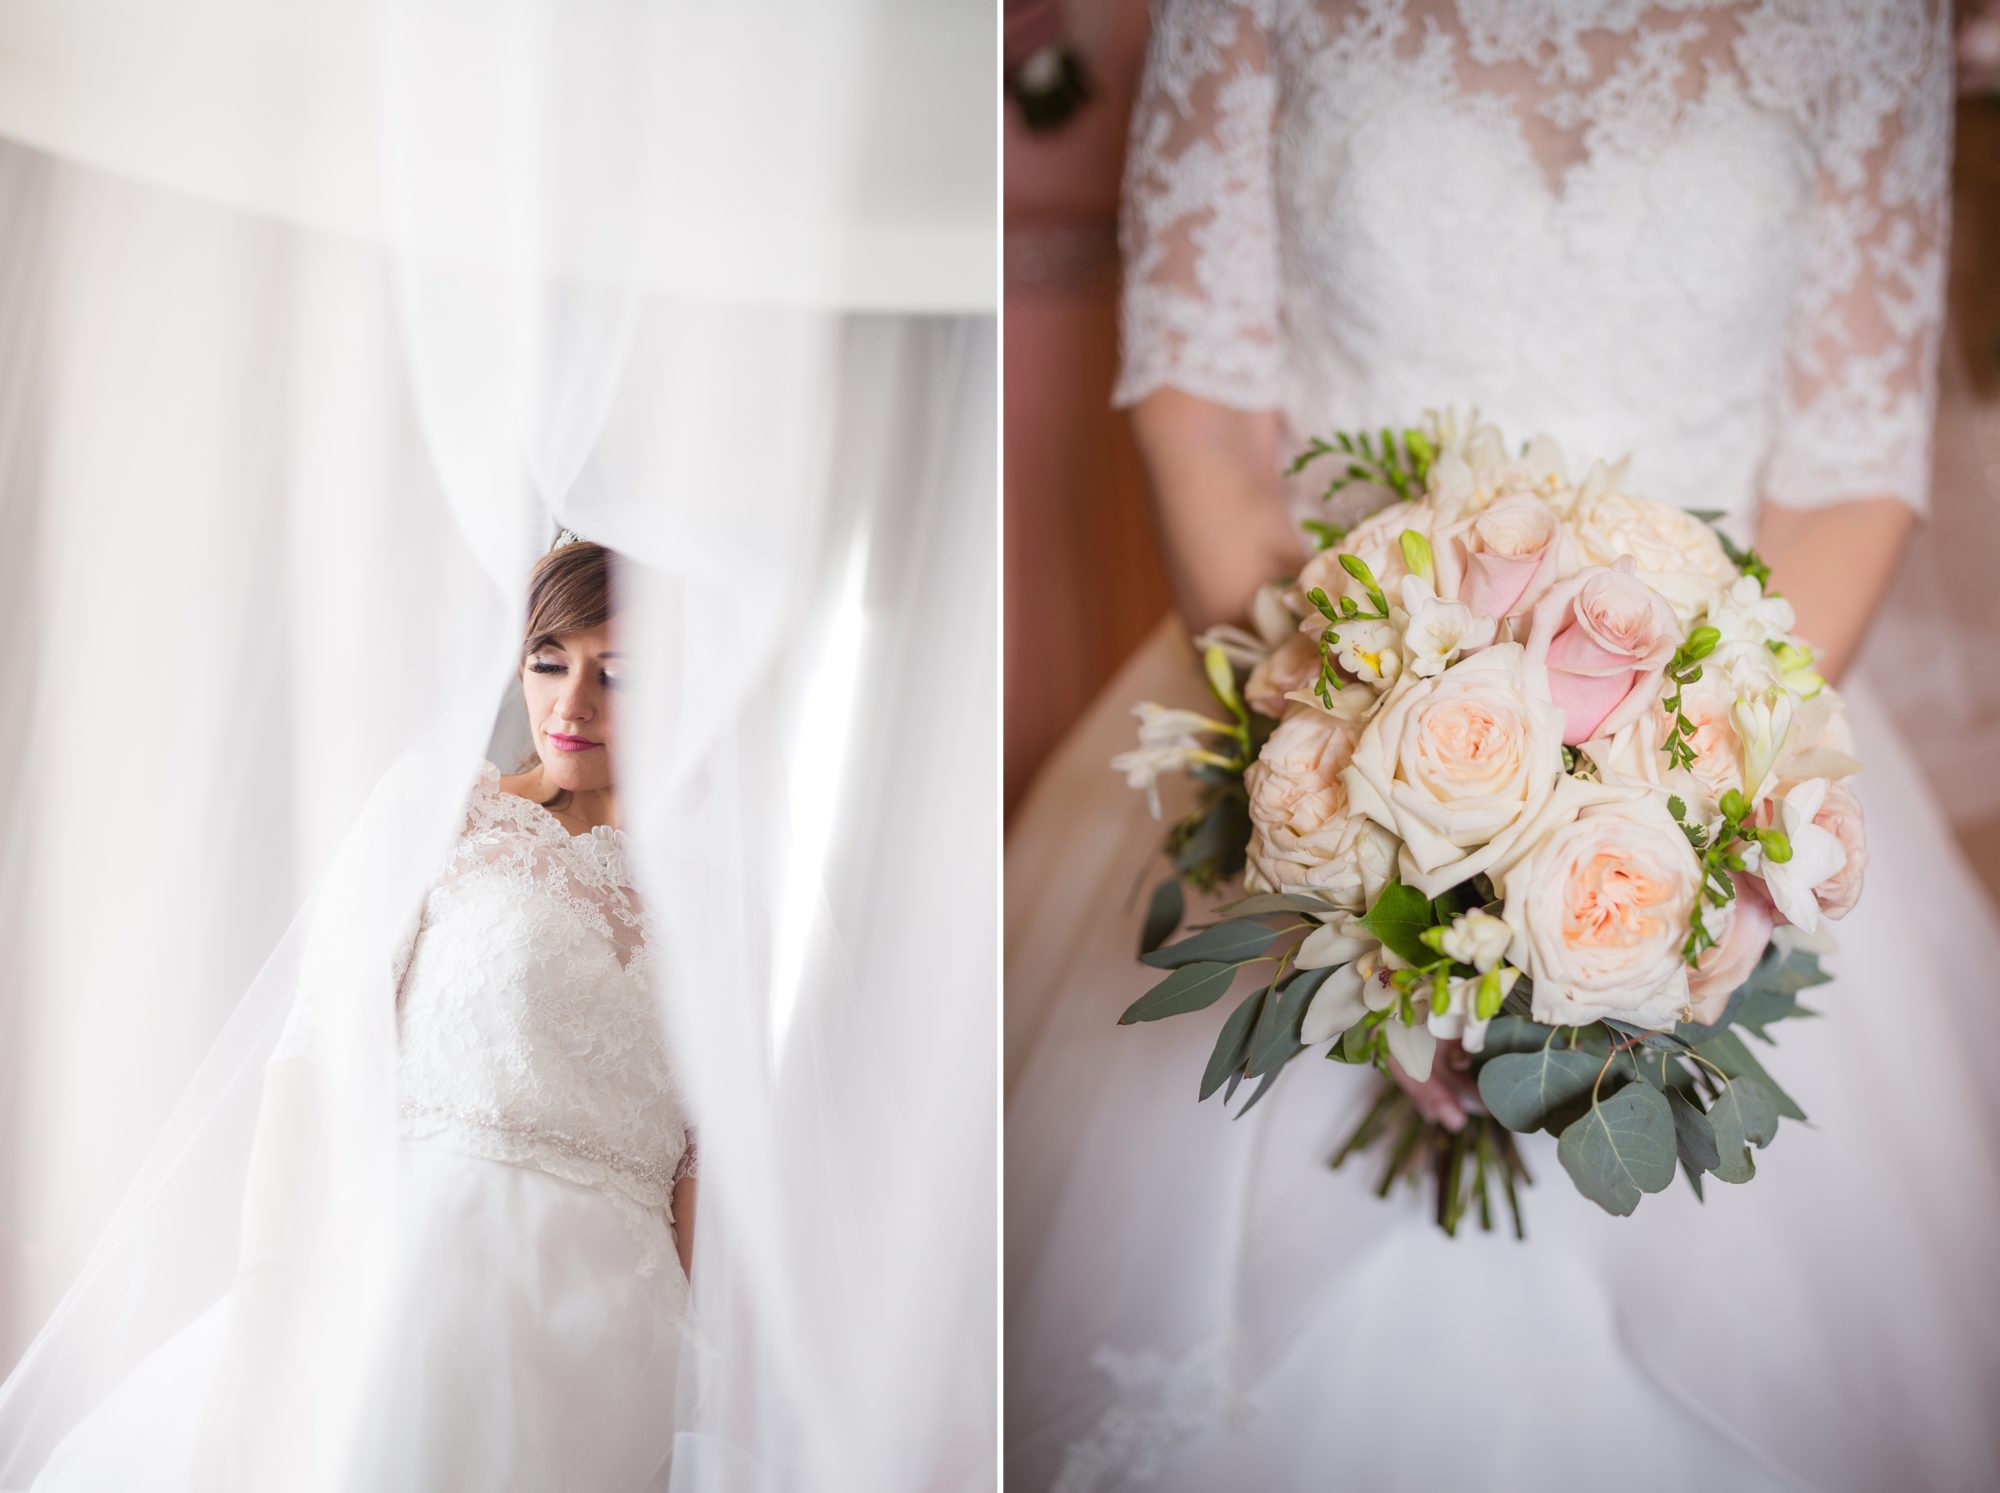 Beautiful portrait of the bride being spotted through white lace at the Omni King Edward Hotel, Toronto